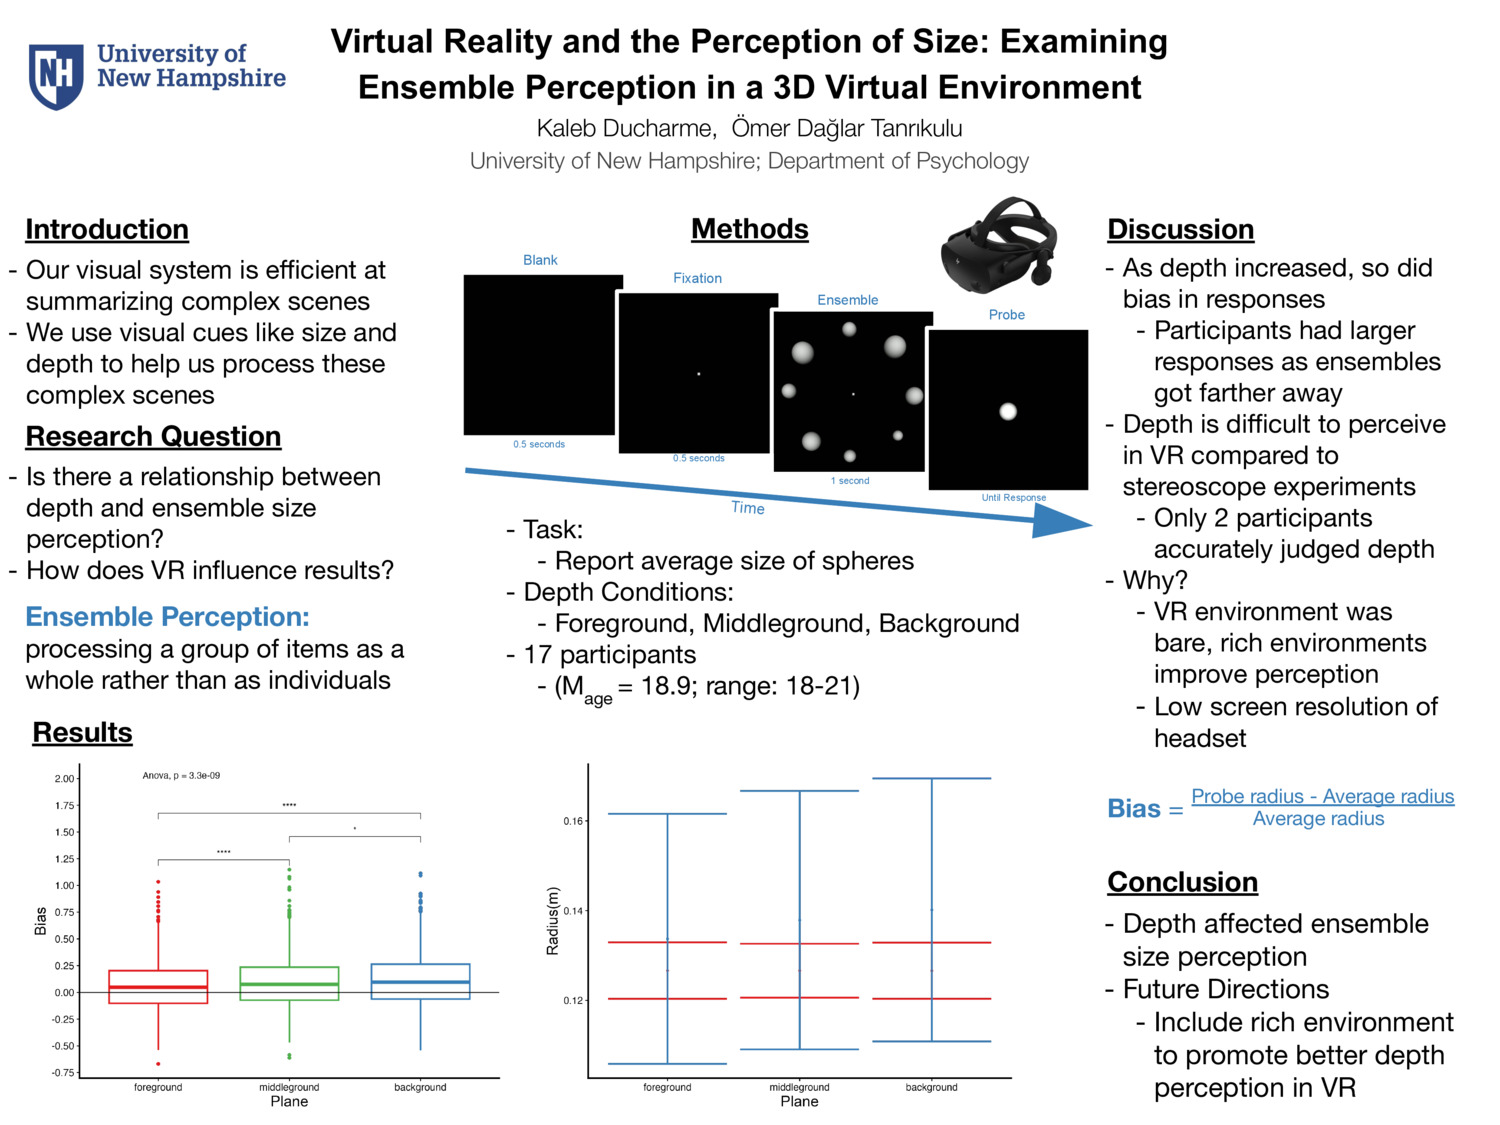 Virtual Reality And The Perception Of Size: Examining Ensemble Perception In A 3d Virtual Environment by ot1031